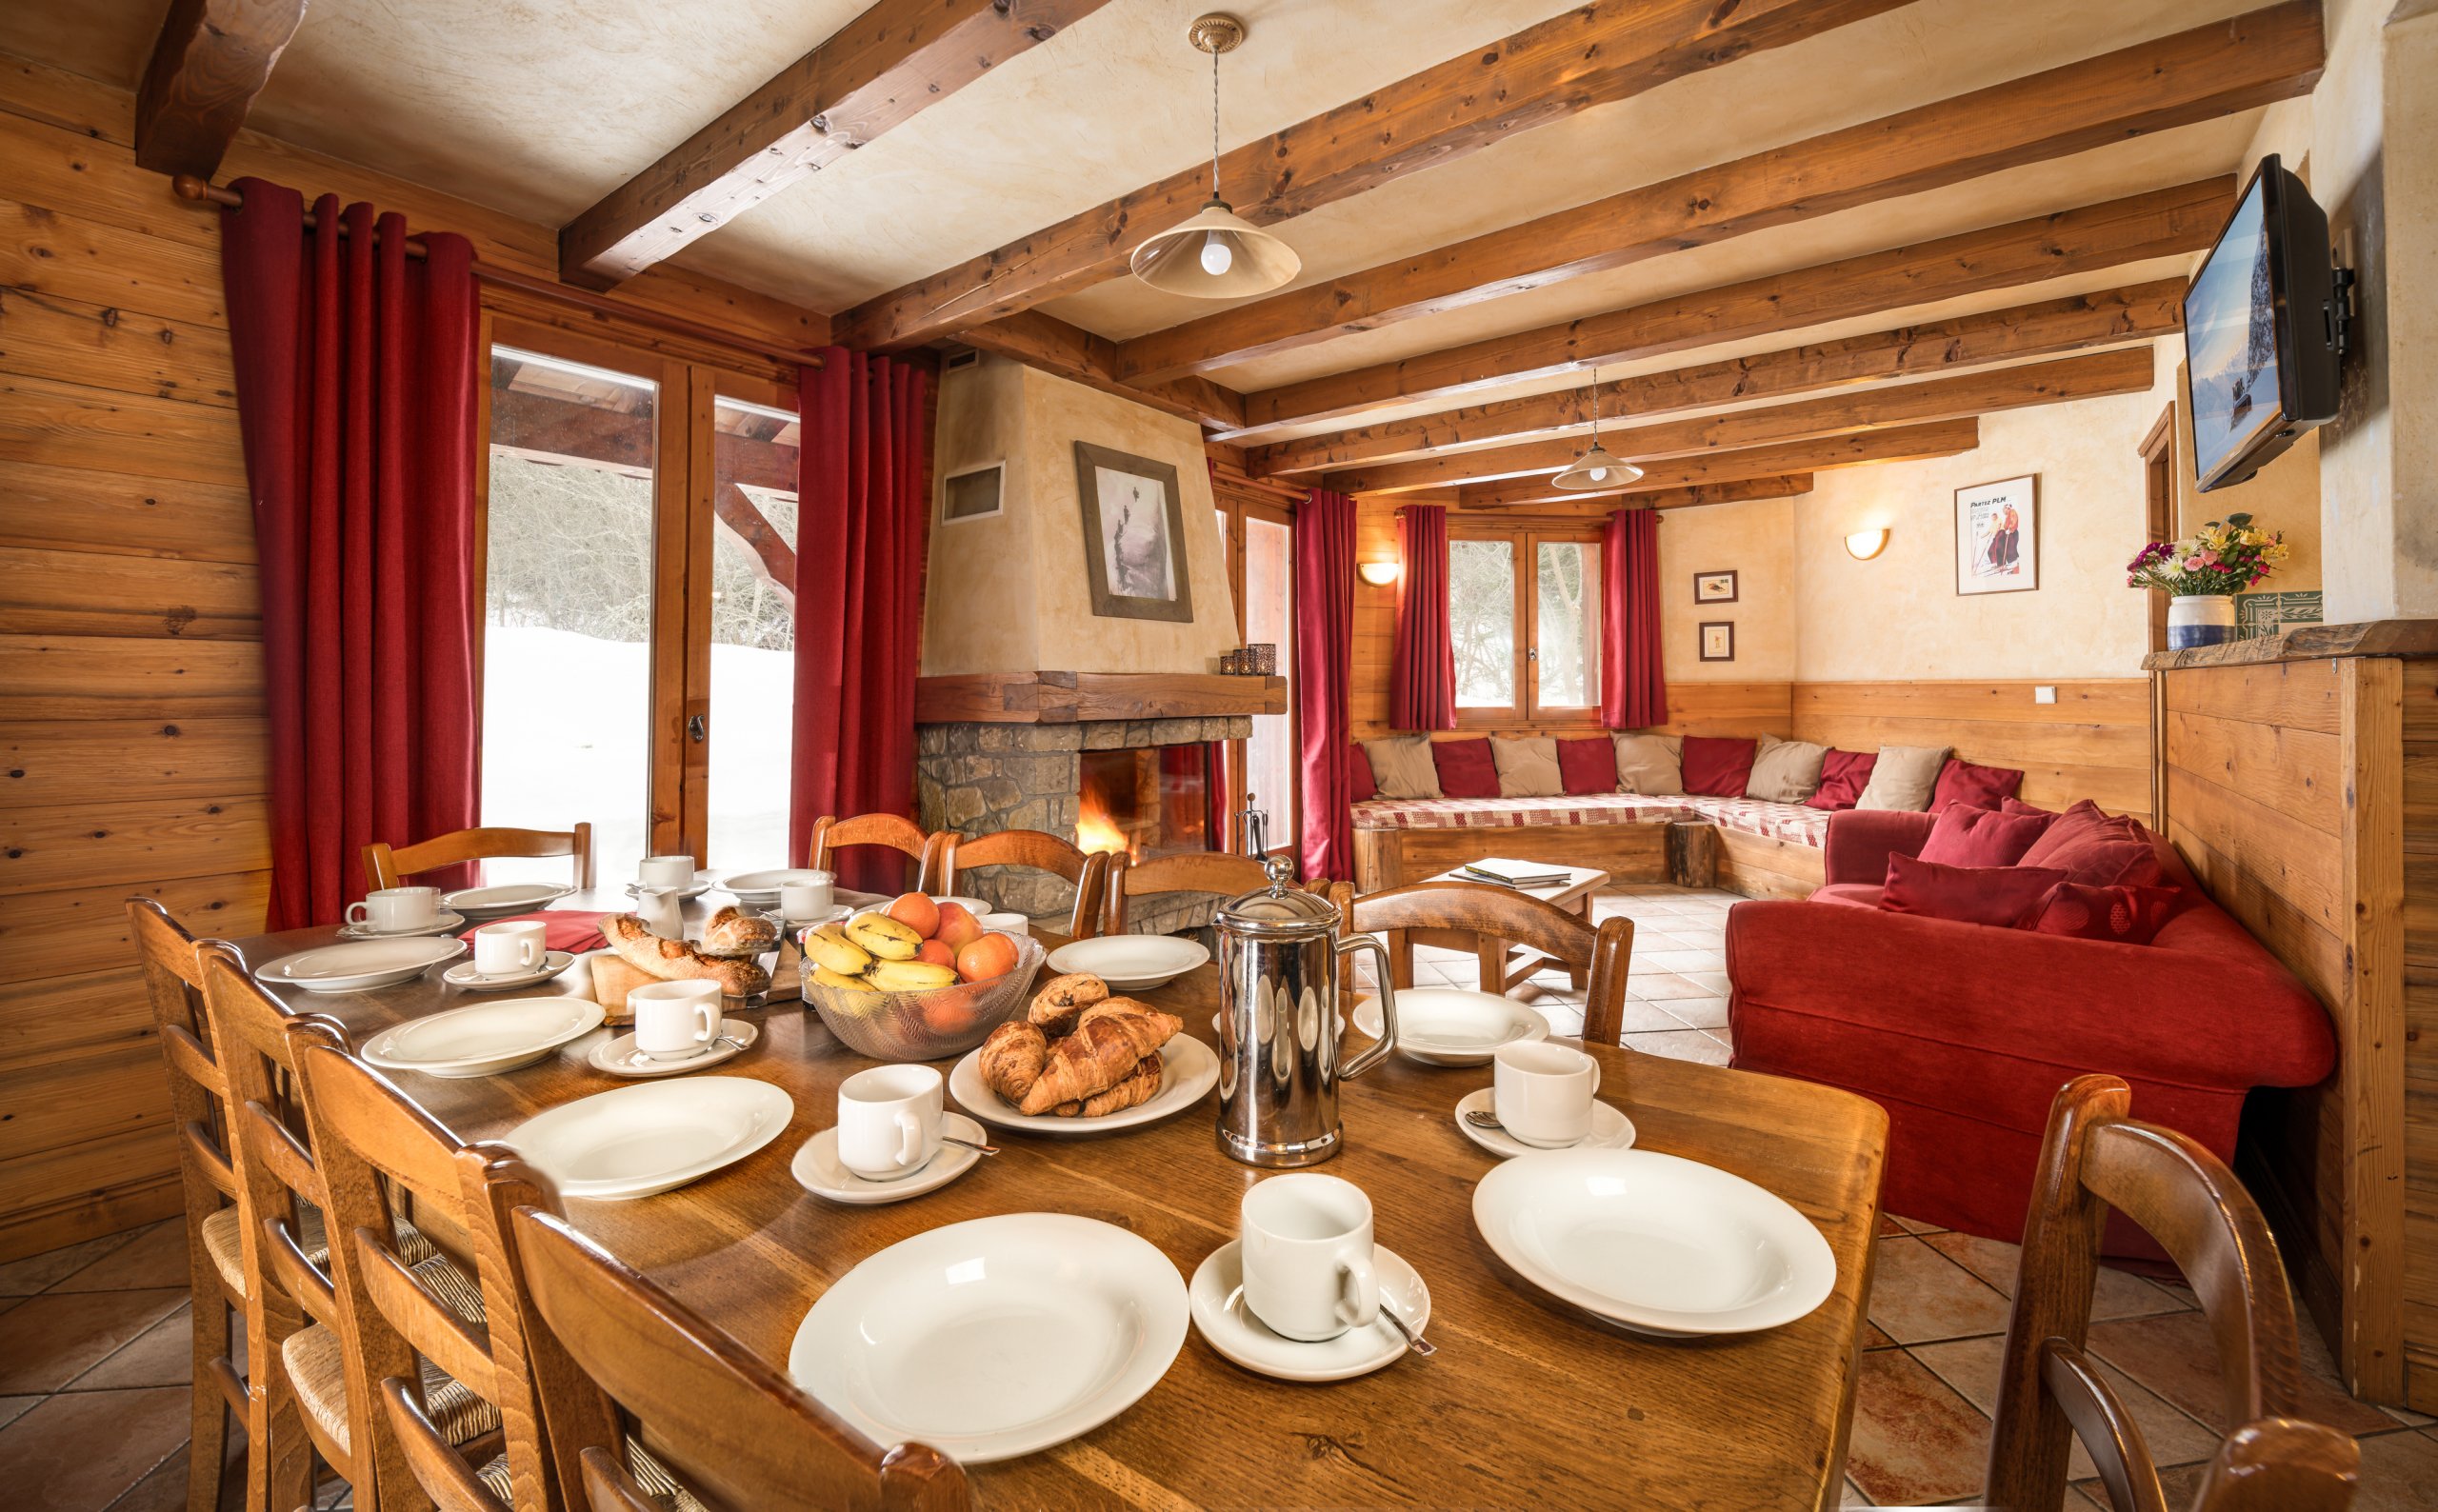 Could Contactless Catering Change The Way We Chalet?